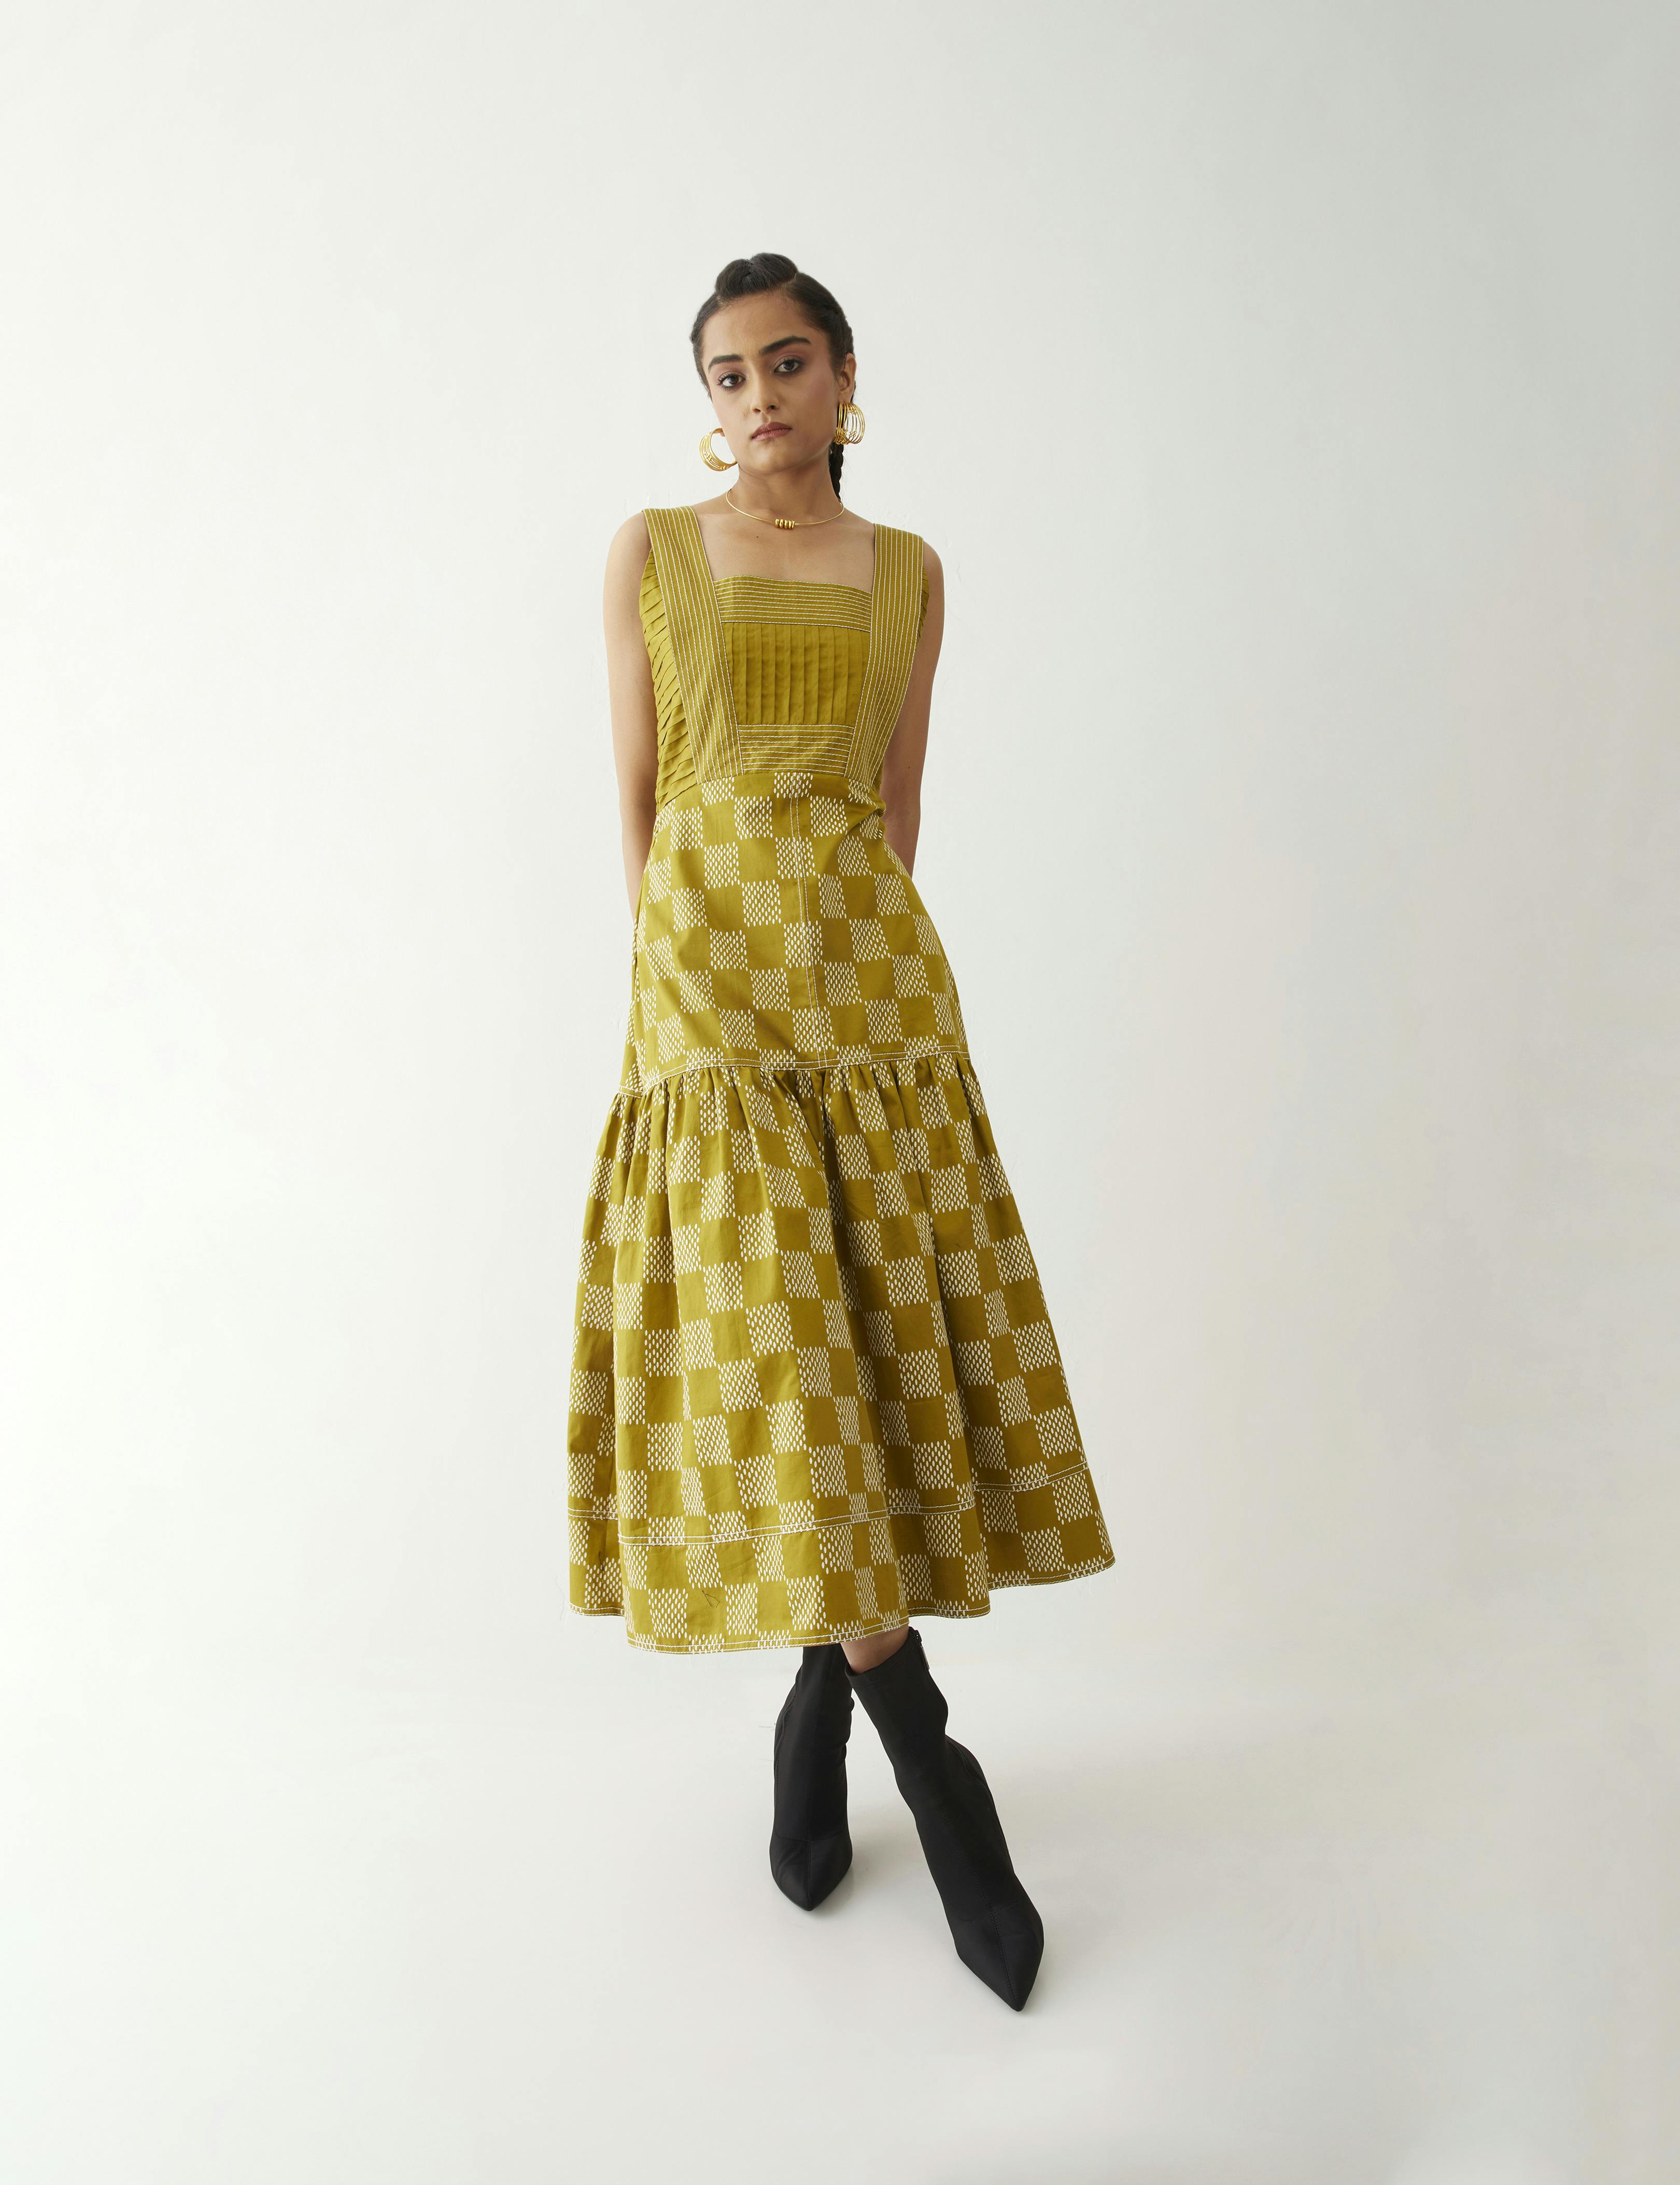 MAPLE Dress, a product by Son of a Noble